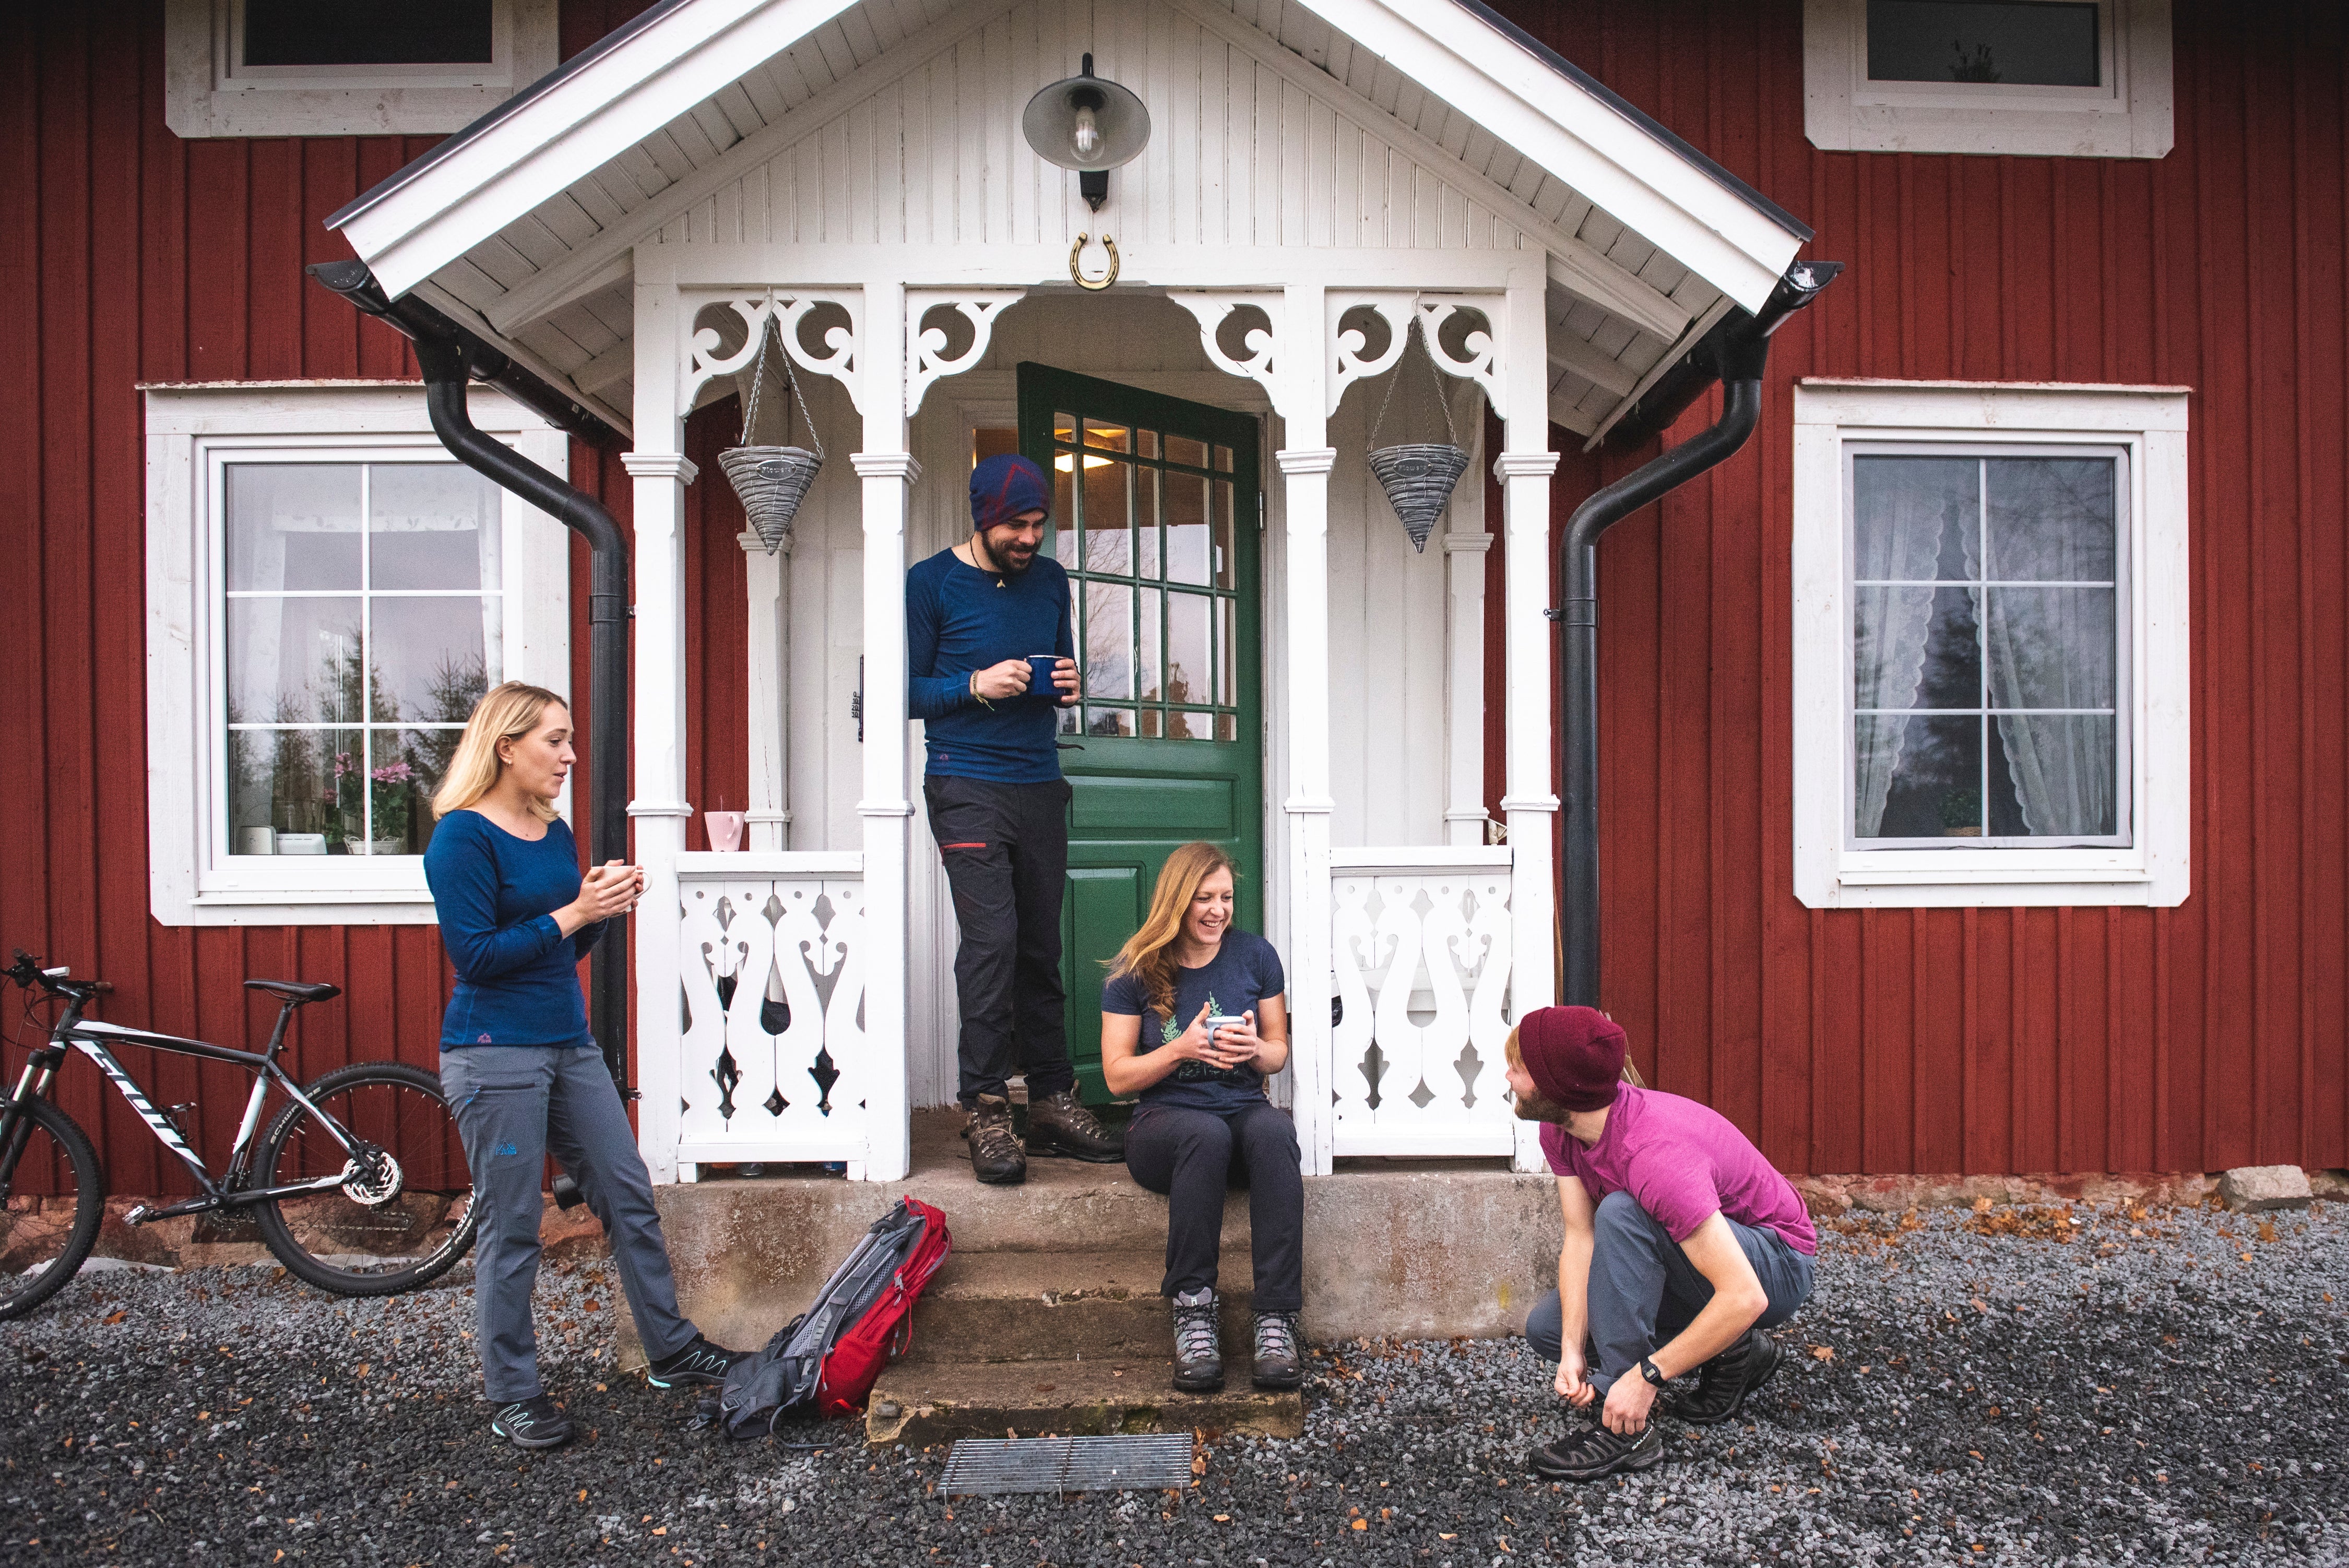 Collection of Fjern Base Layers and T-Shirts being worn on the porch of a wooden house in Finland